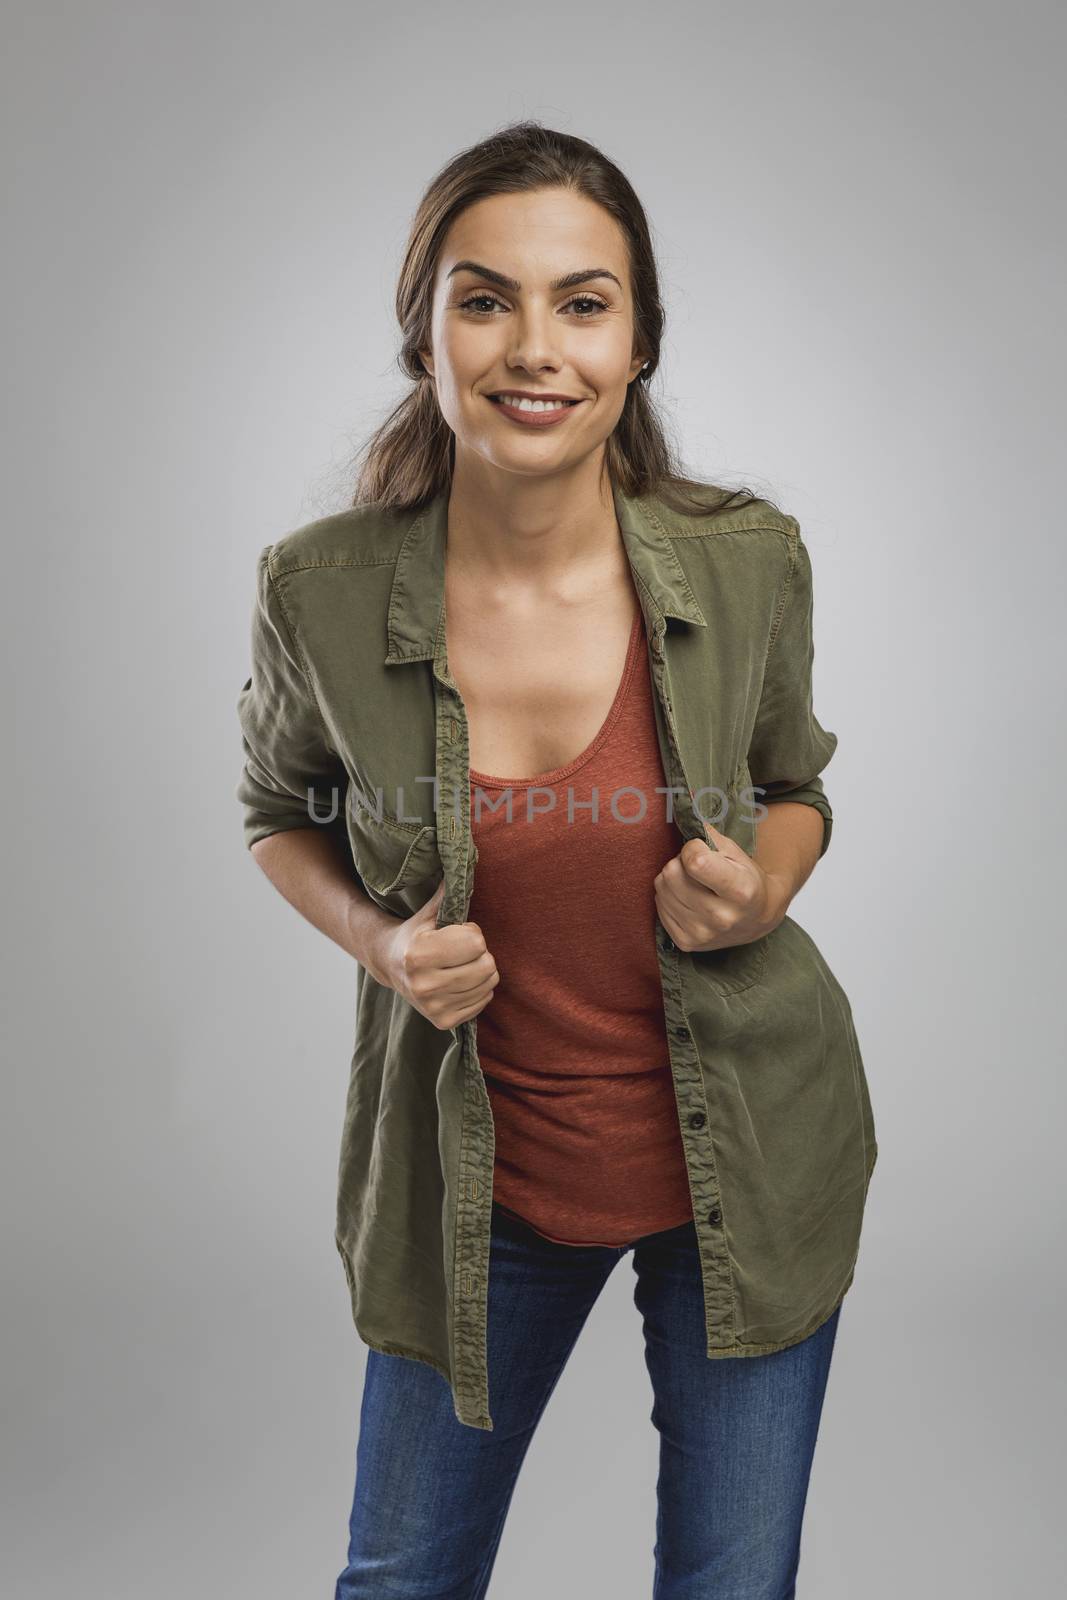 Beautiful young woman standing over a gray background and smiling